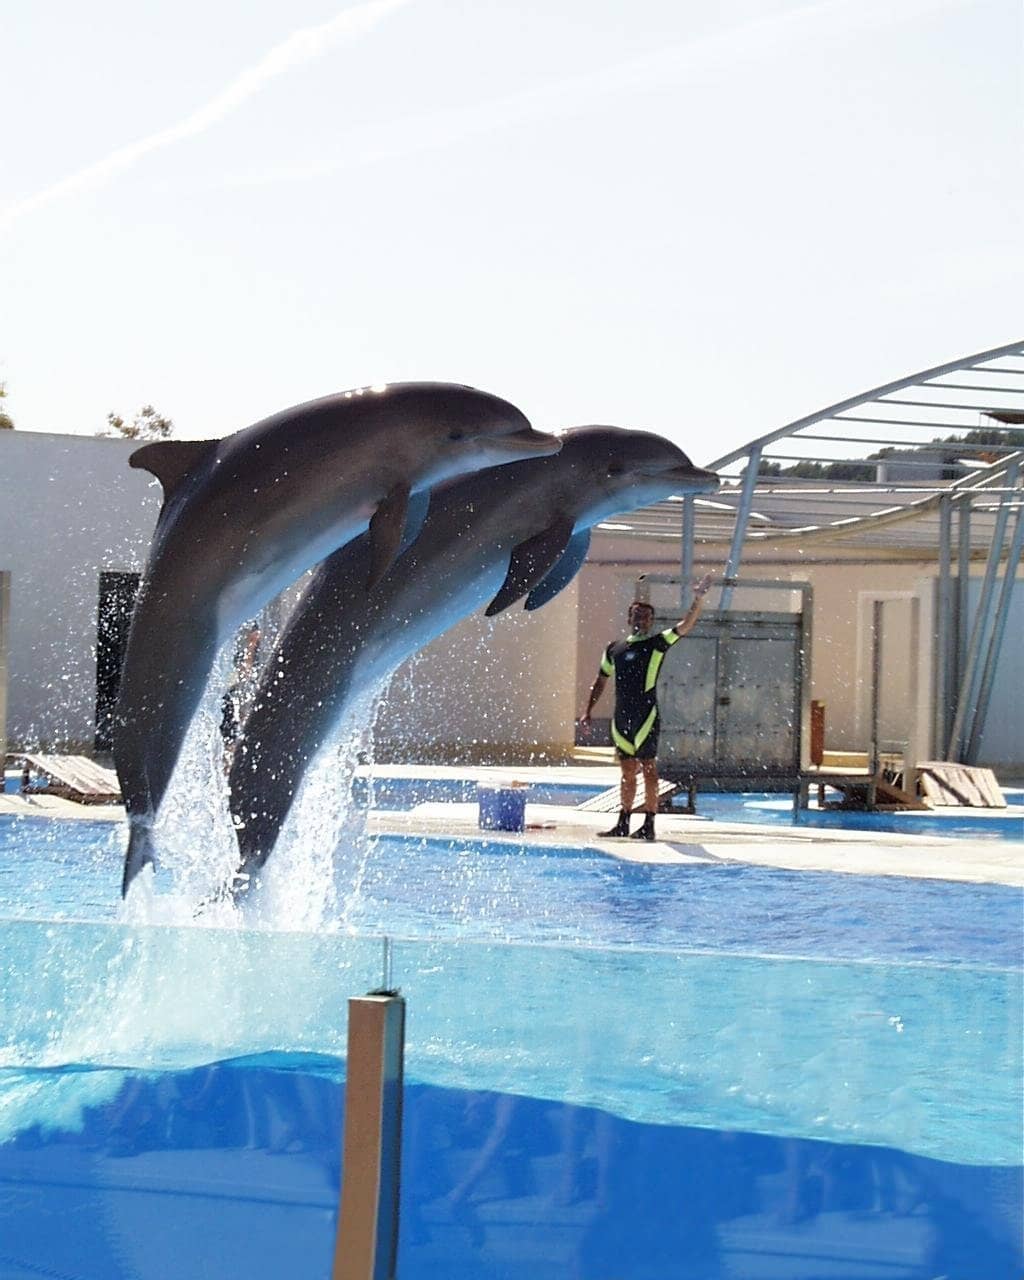 Dolphin leap image after removal of man and boy